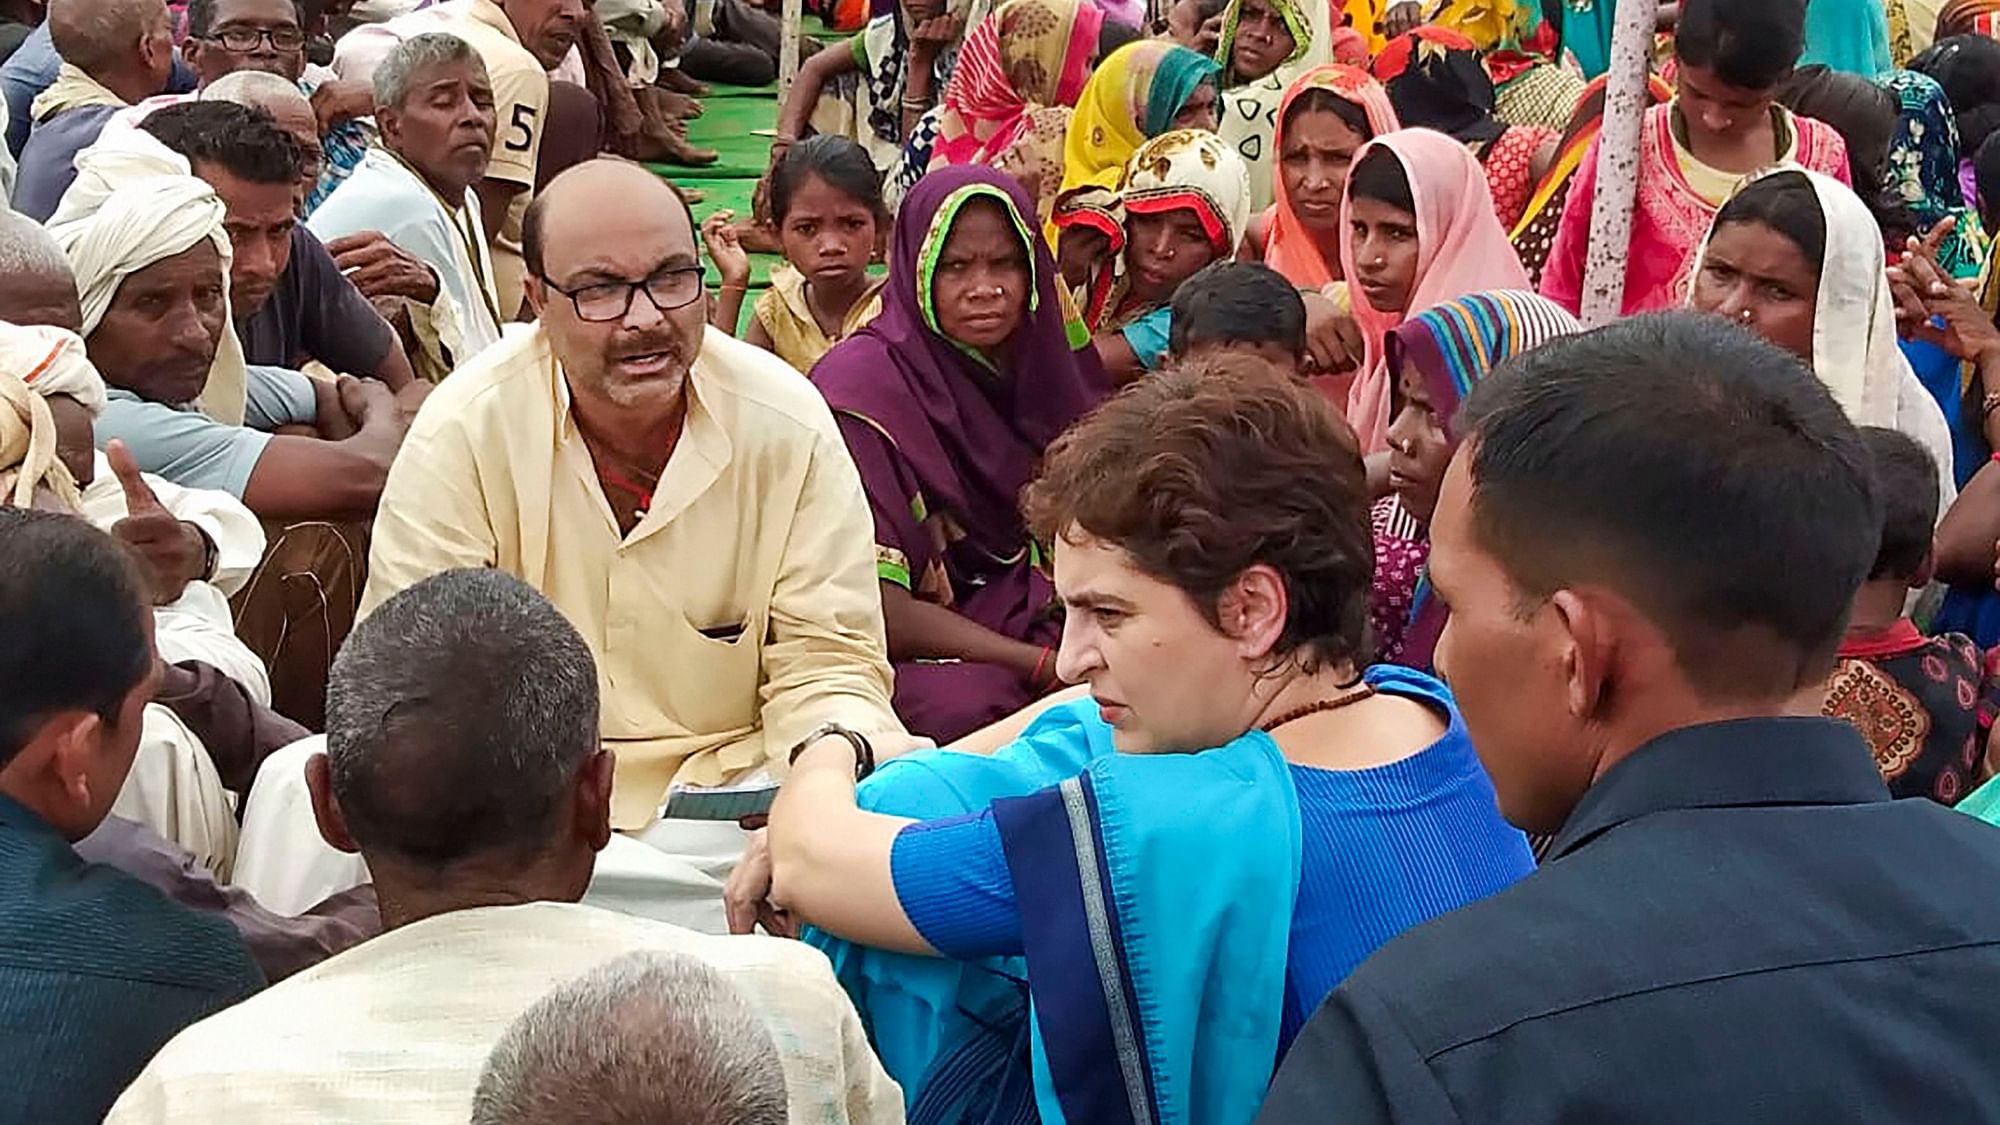 Congress leader Priyanka Gandhi Vadra interacts with locals at Ubha village where ten people had died in a firing incident over a land dispute last month, in Sonbhadra district, Tuesday.